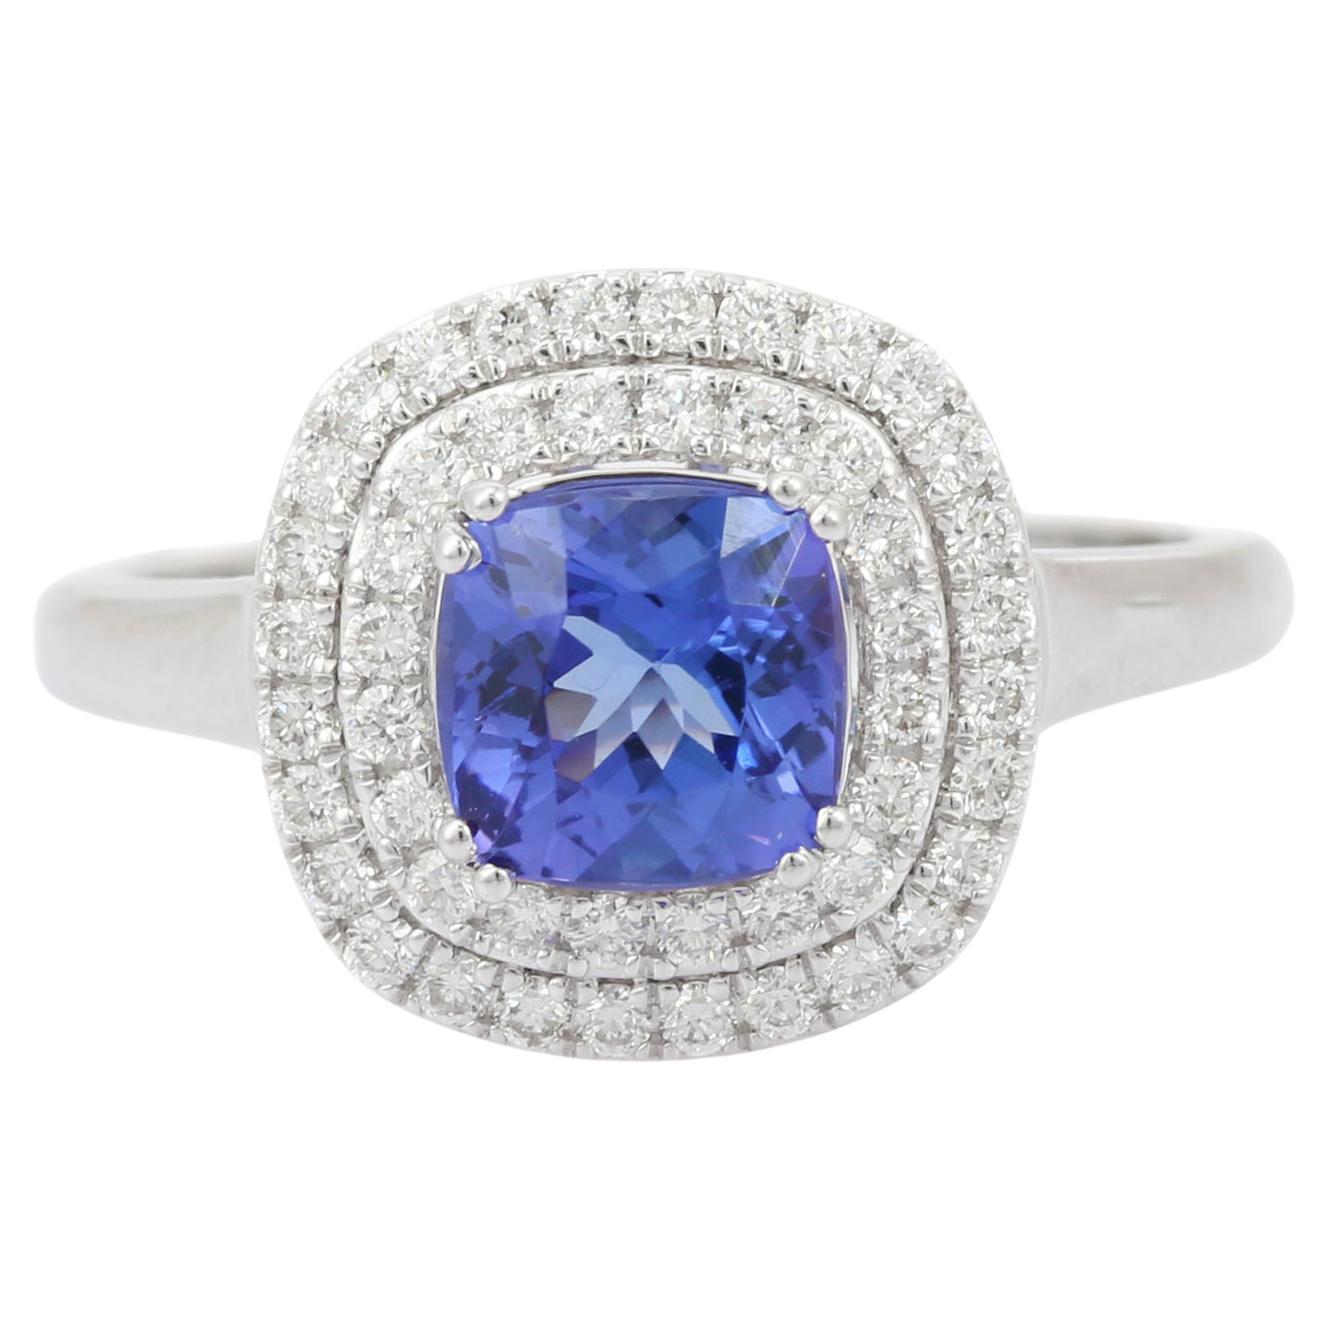 For Sale:  18k Solid White Gold Cushion Cut 1.2 Ct Tanzanite Diamond Ring for Women